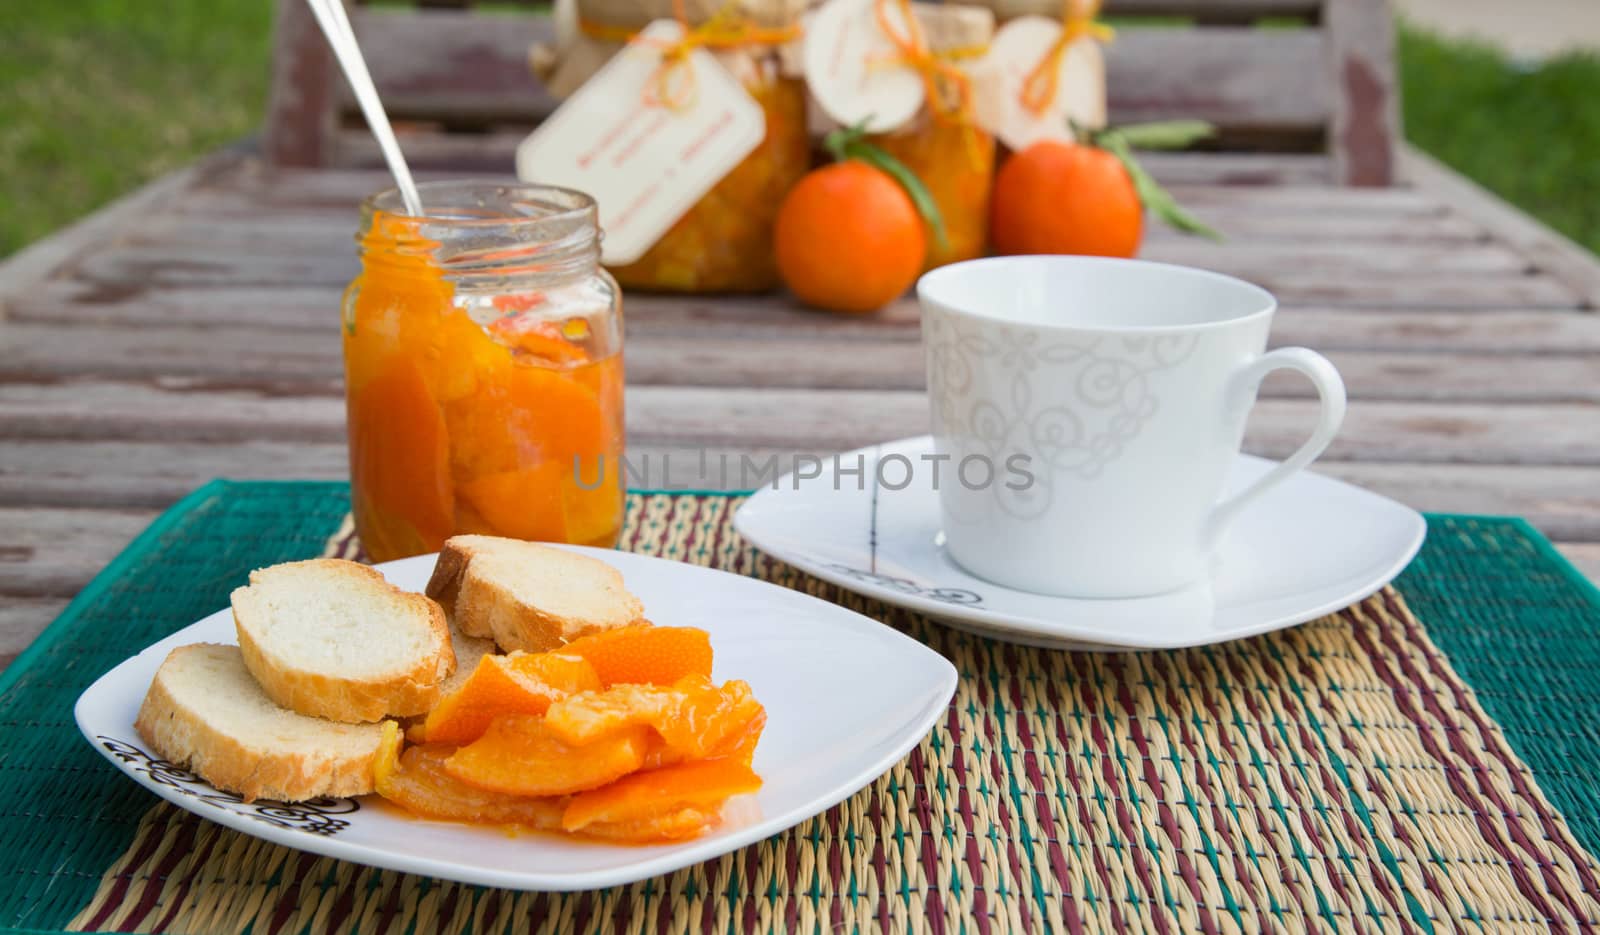 Homemade tangerine marmalade, two slices of bread on the white square plate and a cup of milk.